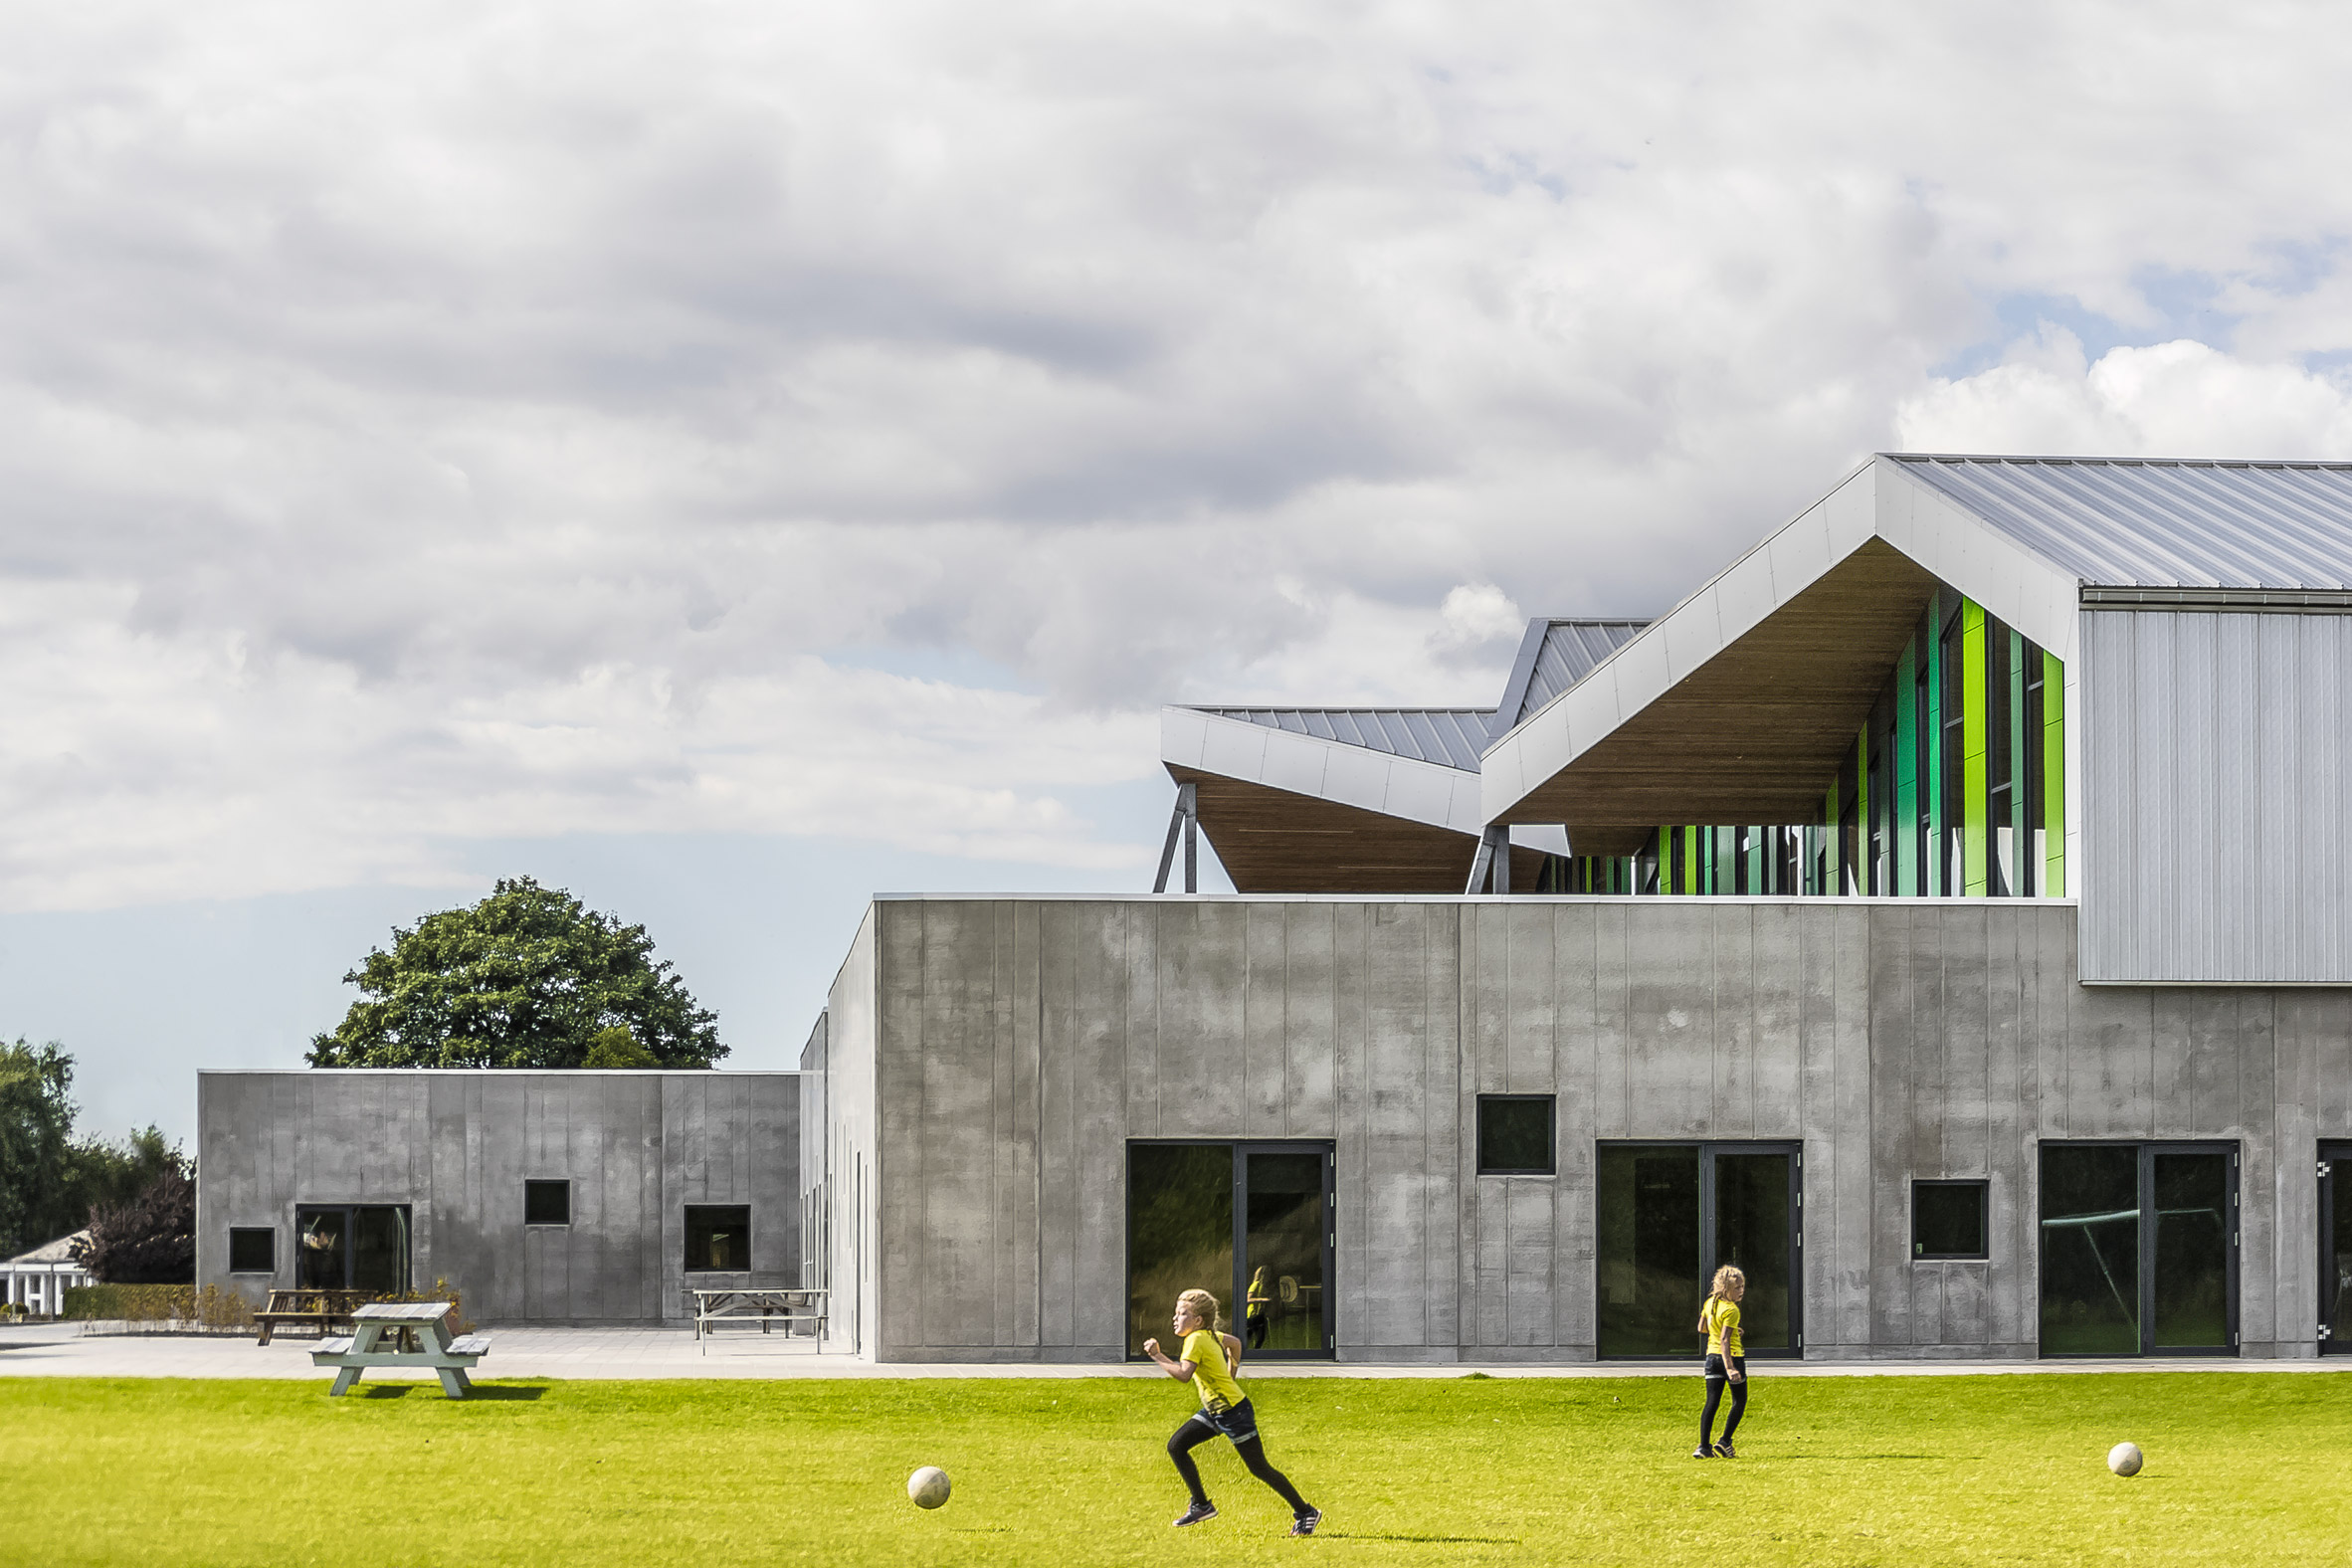 CEBRA completes Danish school with jagged roofs and stripy walls-21